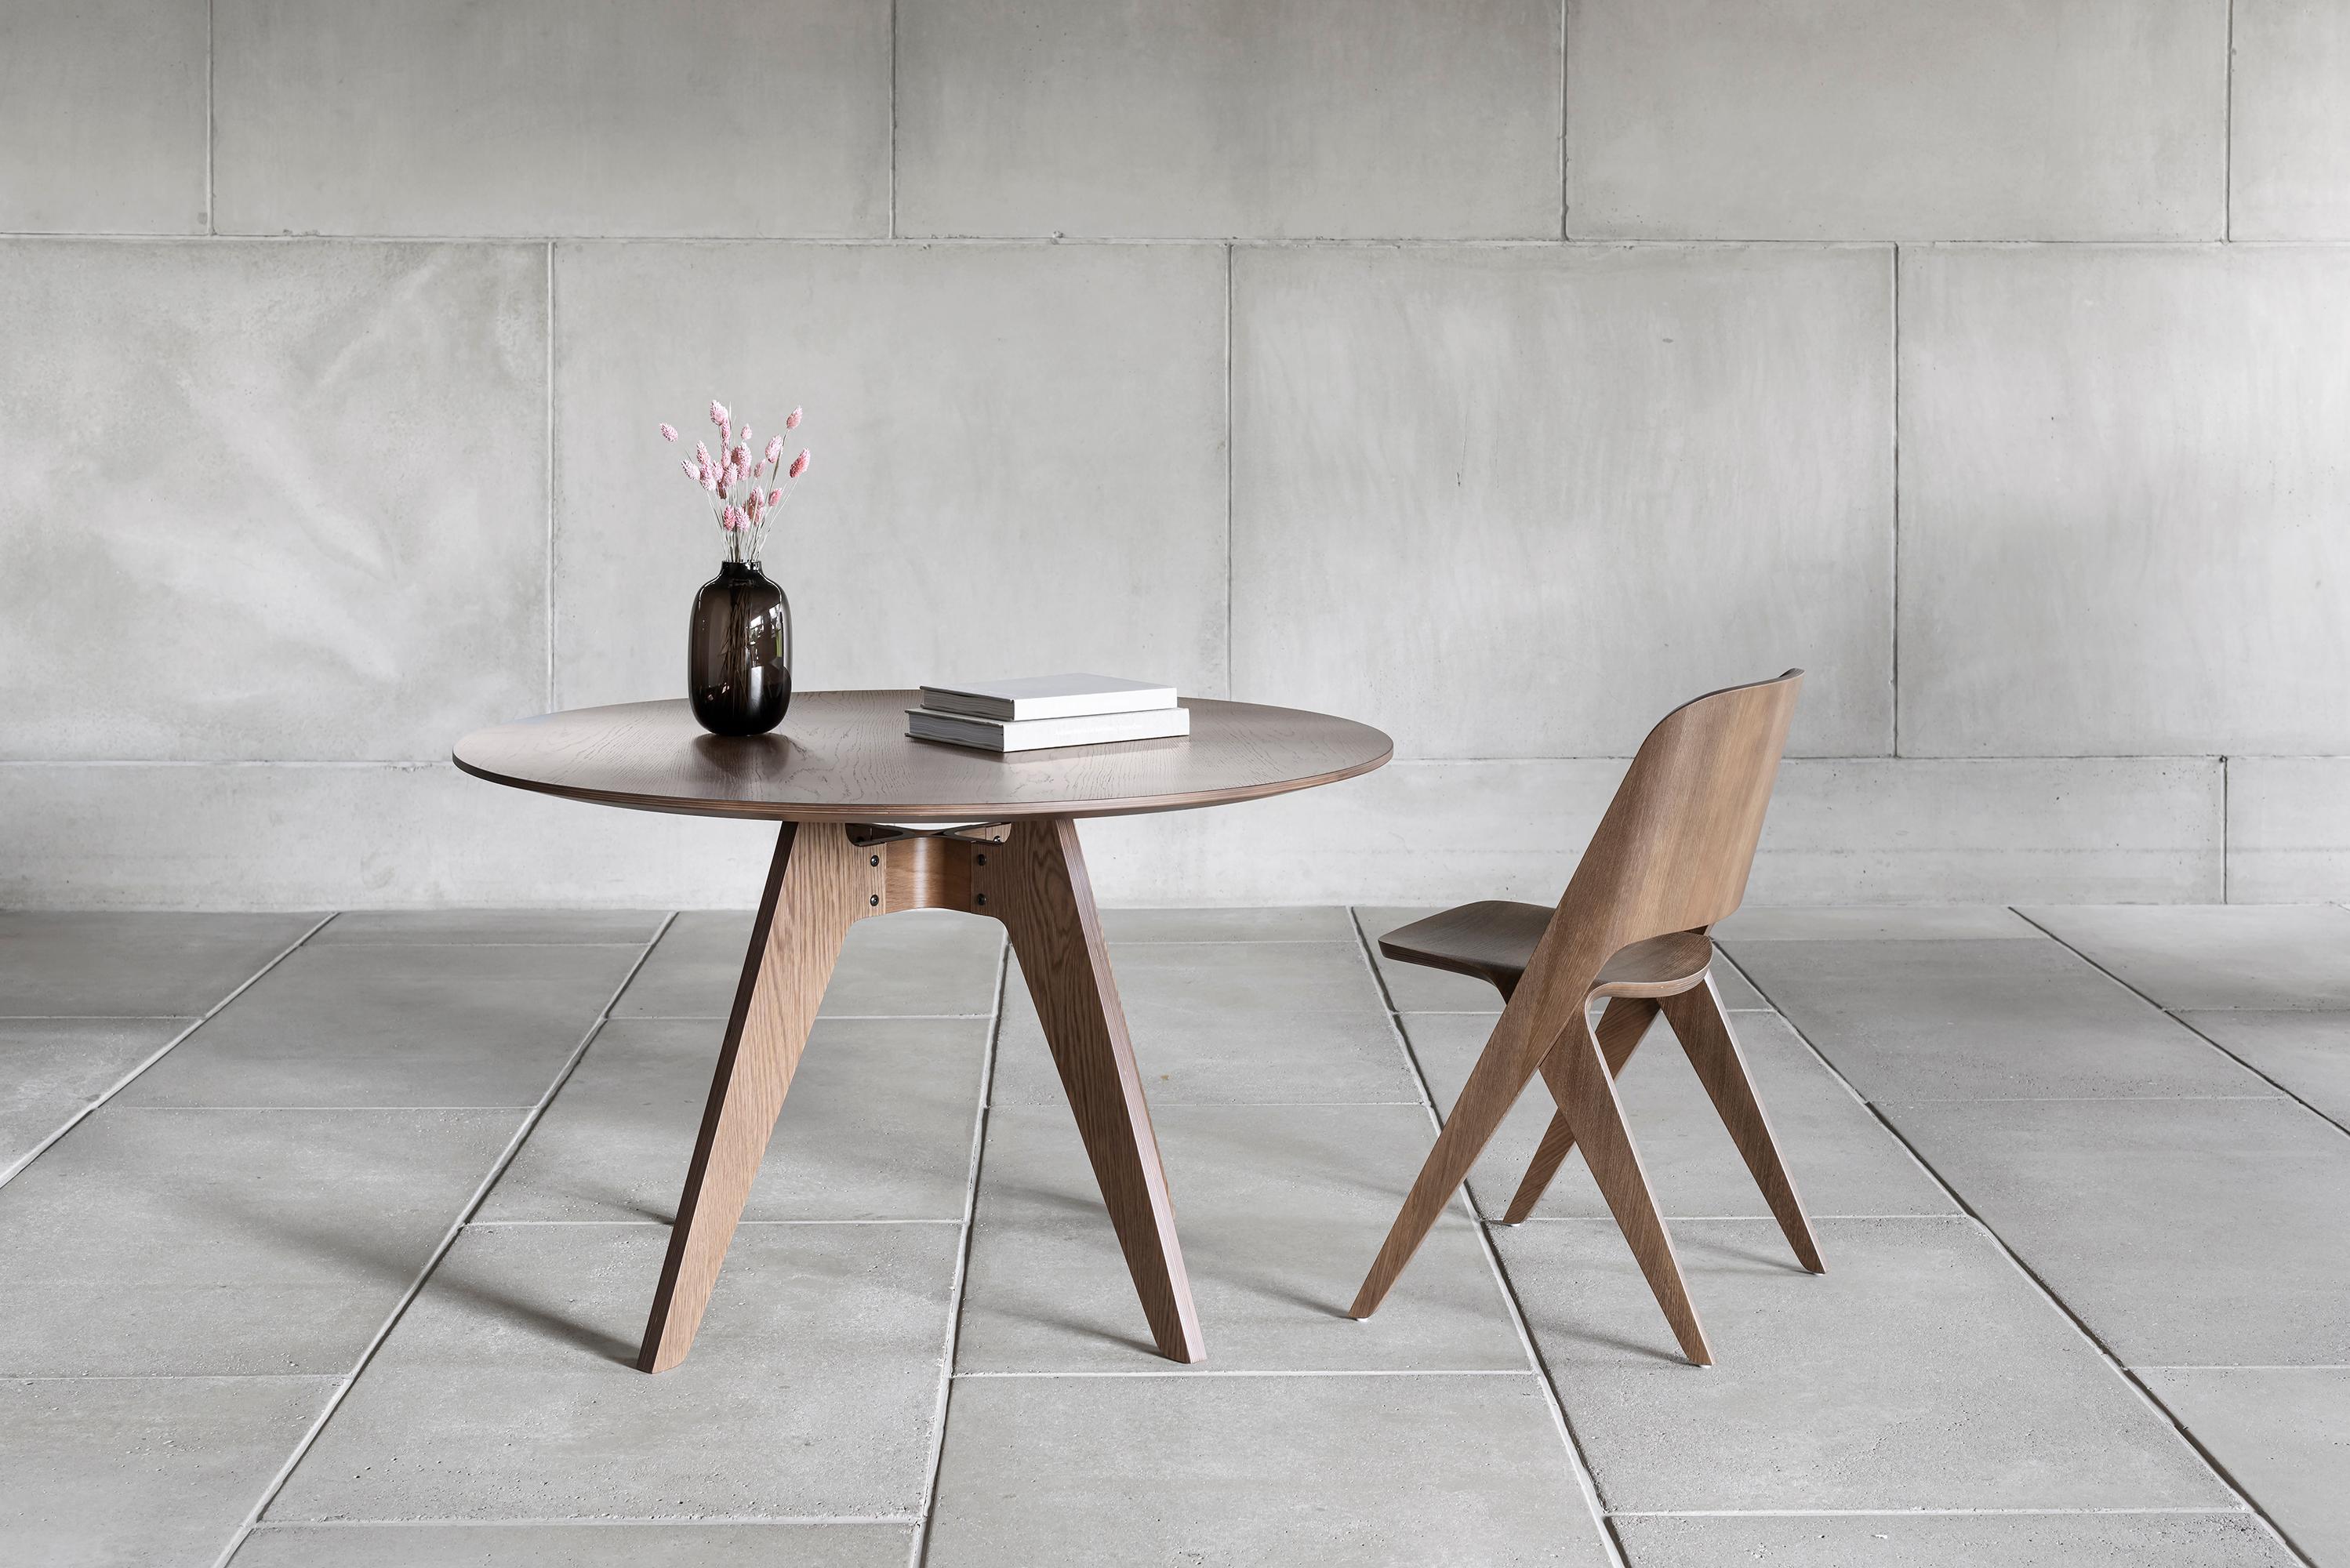 Lavitta round table (100 cm) designed by Timo Mikkonen & Antti Rouhunkoski
Collection Lavitta 2016 by Poiat 

Model shown on picture
Dimensions : H. 72 cm x D. 100 cm 
Color : Dark Oak 
Three legs 

The Lavitta Collection draws upon the